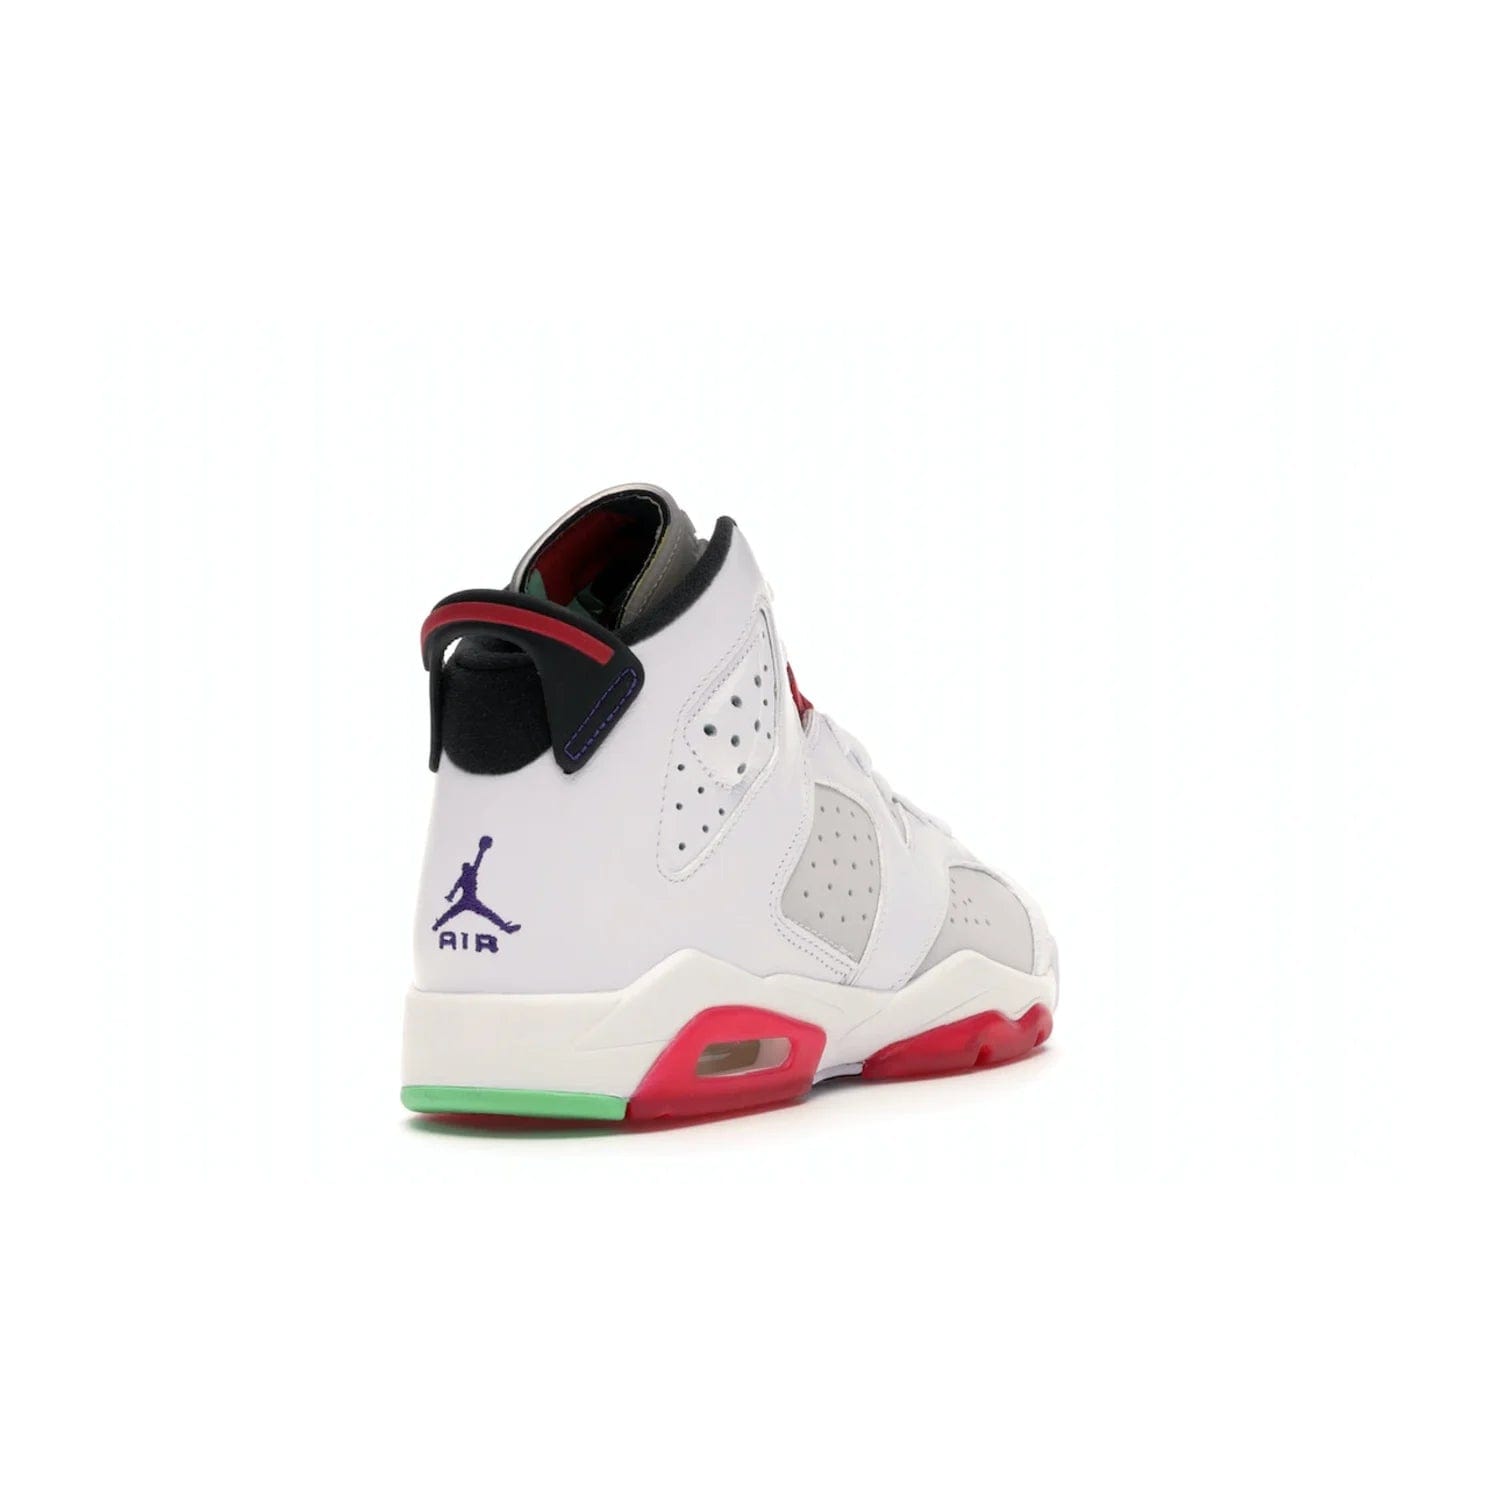 Jordan 6 Retro Hare (GS) - Image 31 - Only at www.BallersClubKickz.com - The Air Jordan 6 Hare GS. Comfortable suede upper, perforations, red pods, two-tone midsole, and signature "Jumpman" emblem. Released 17 June 2020. Perfect for any sneakerhead.